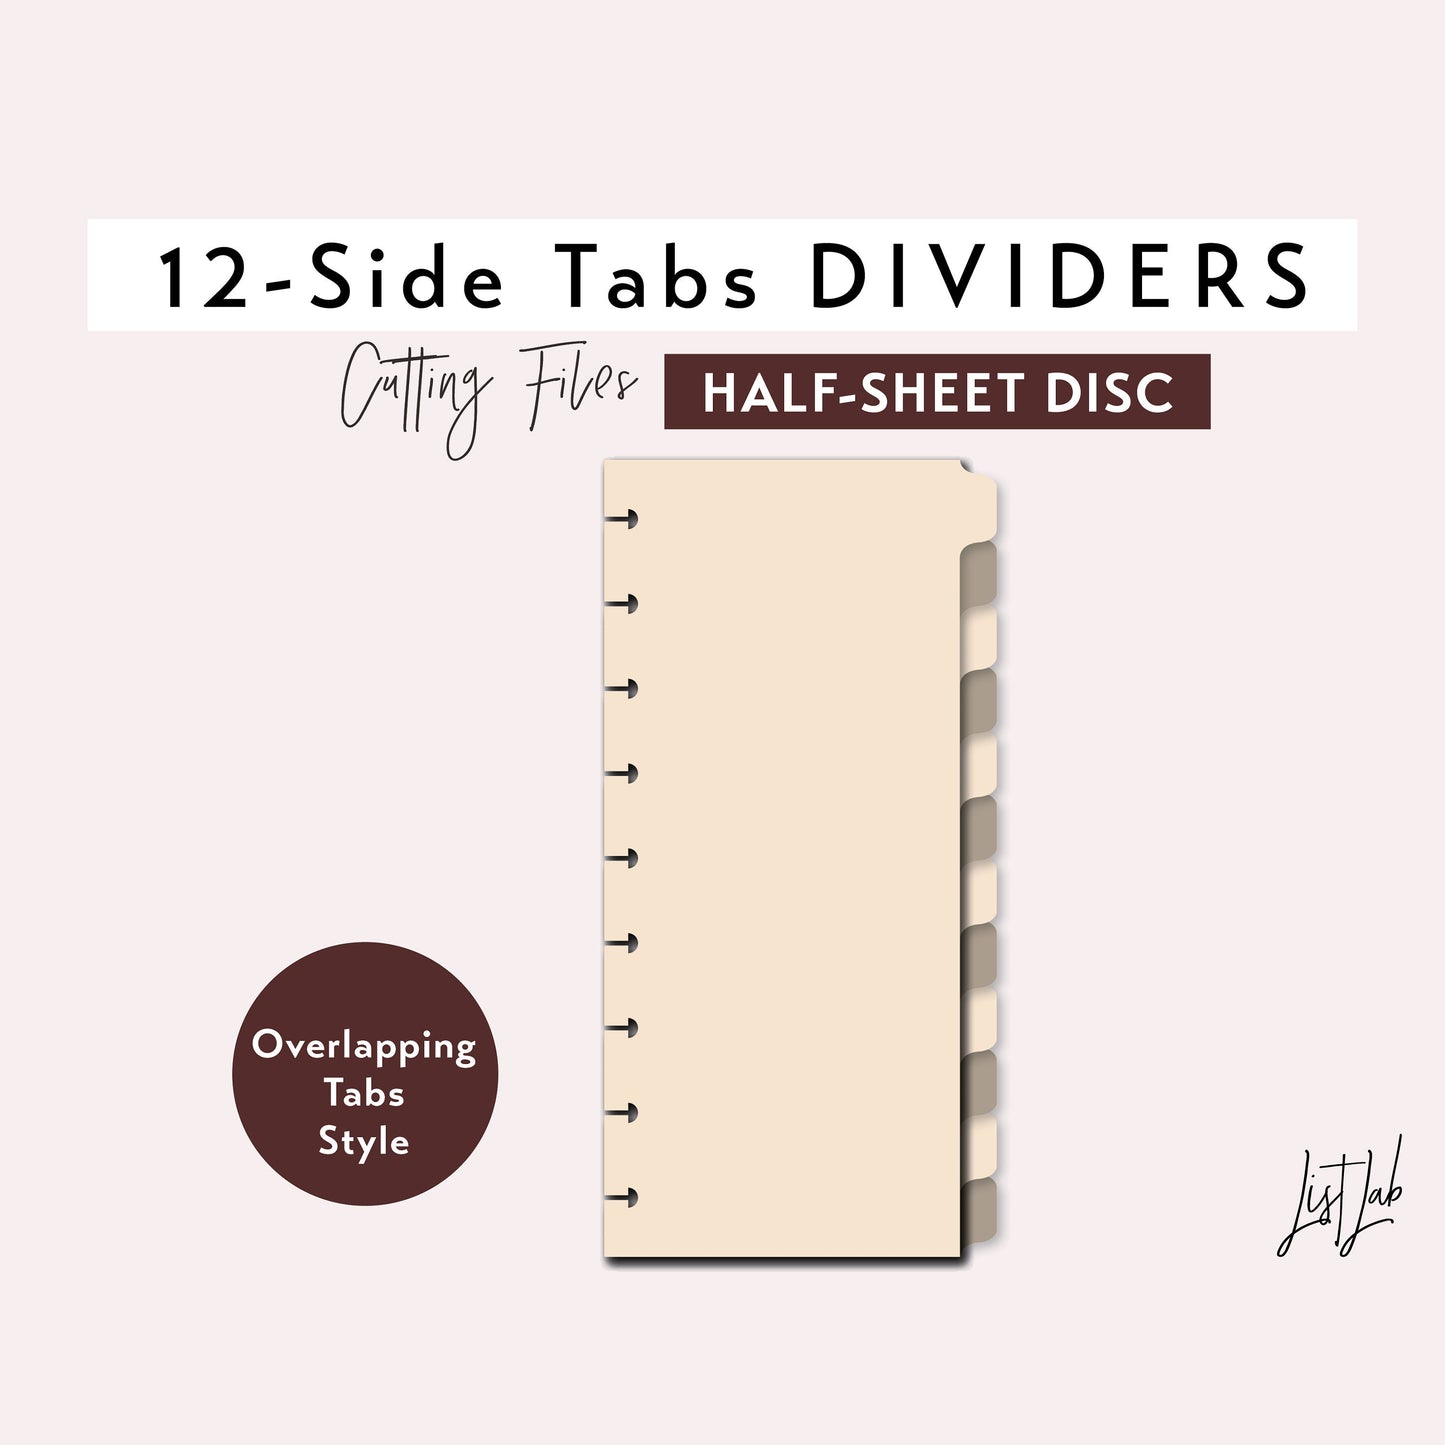 Half-Sheet / Skinny Classic Discbound 12-SIDE TAB DIVIDERS Cutting Files Set